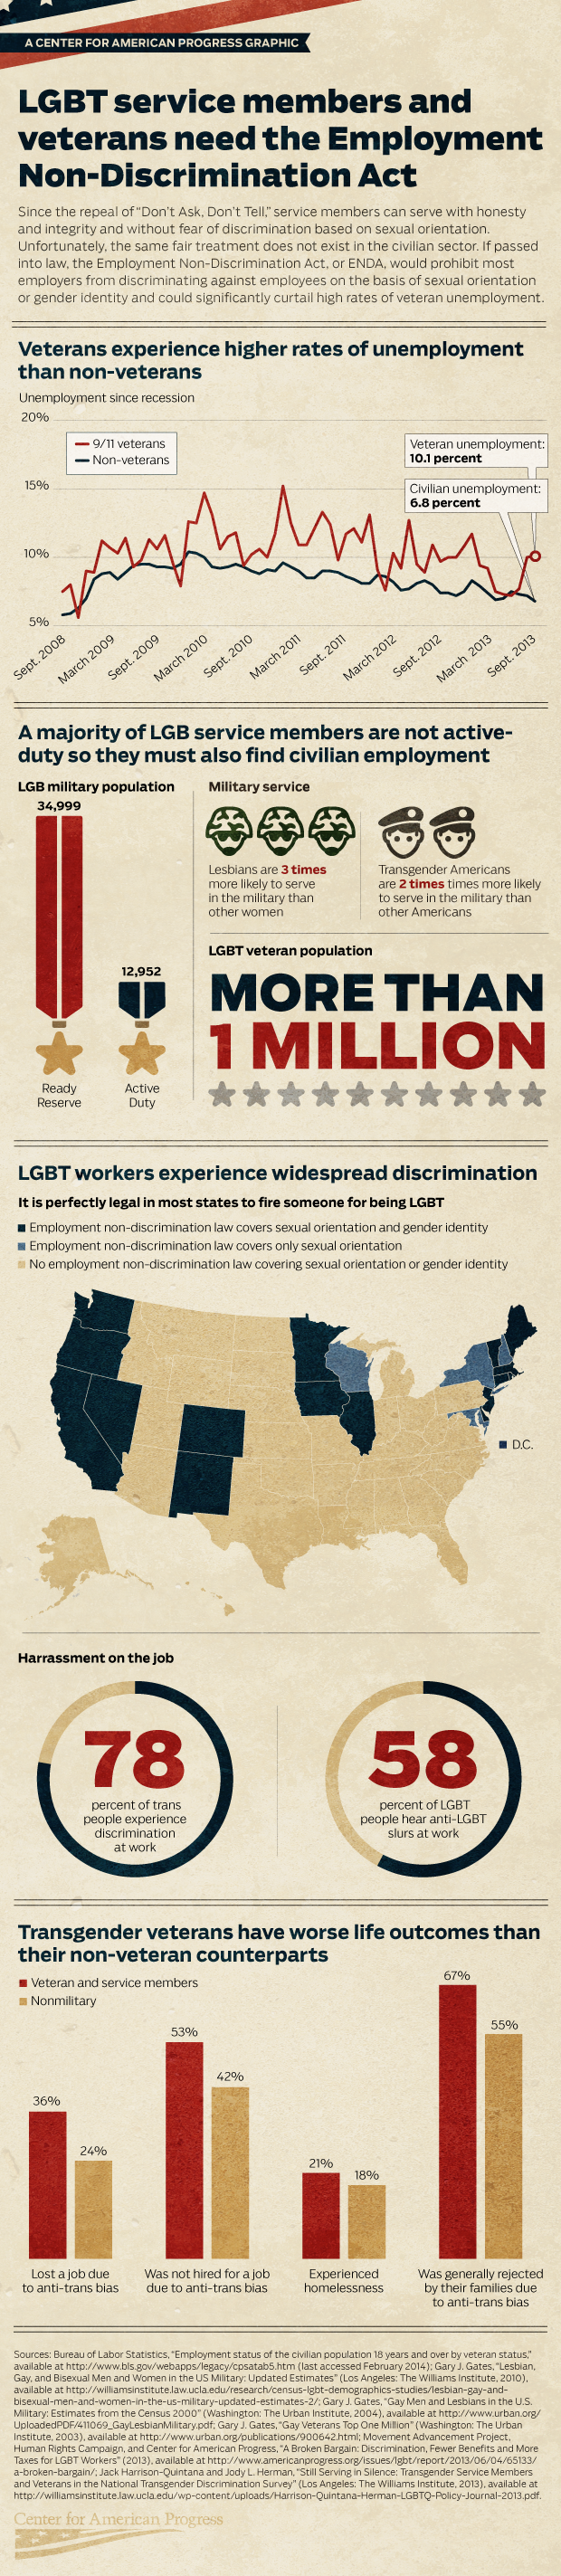 Infographic: LGBT Service Members and Veterans Need the Employment Non-Discrimination Act